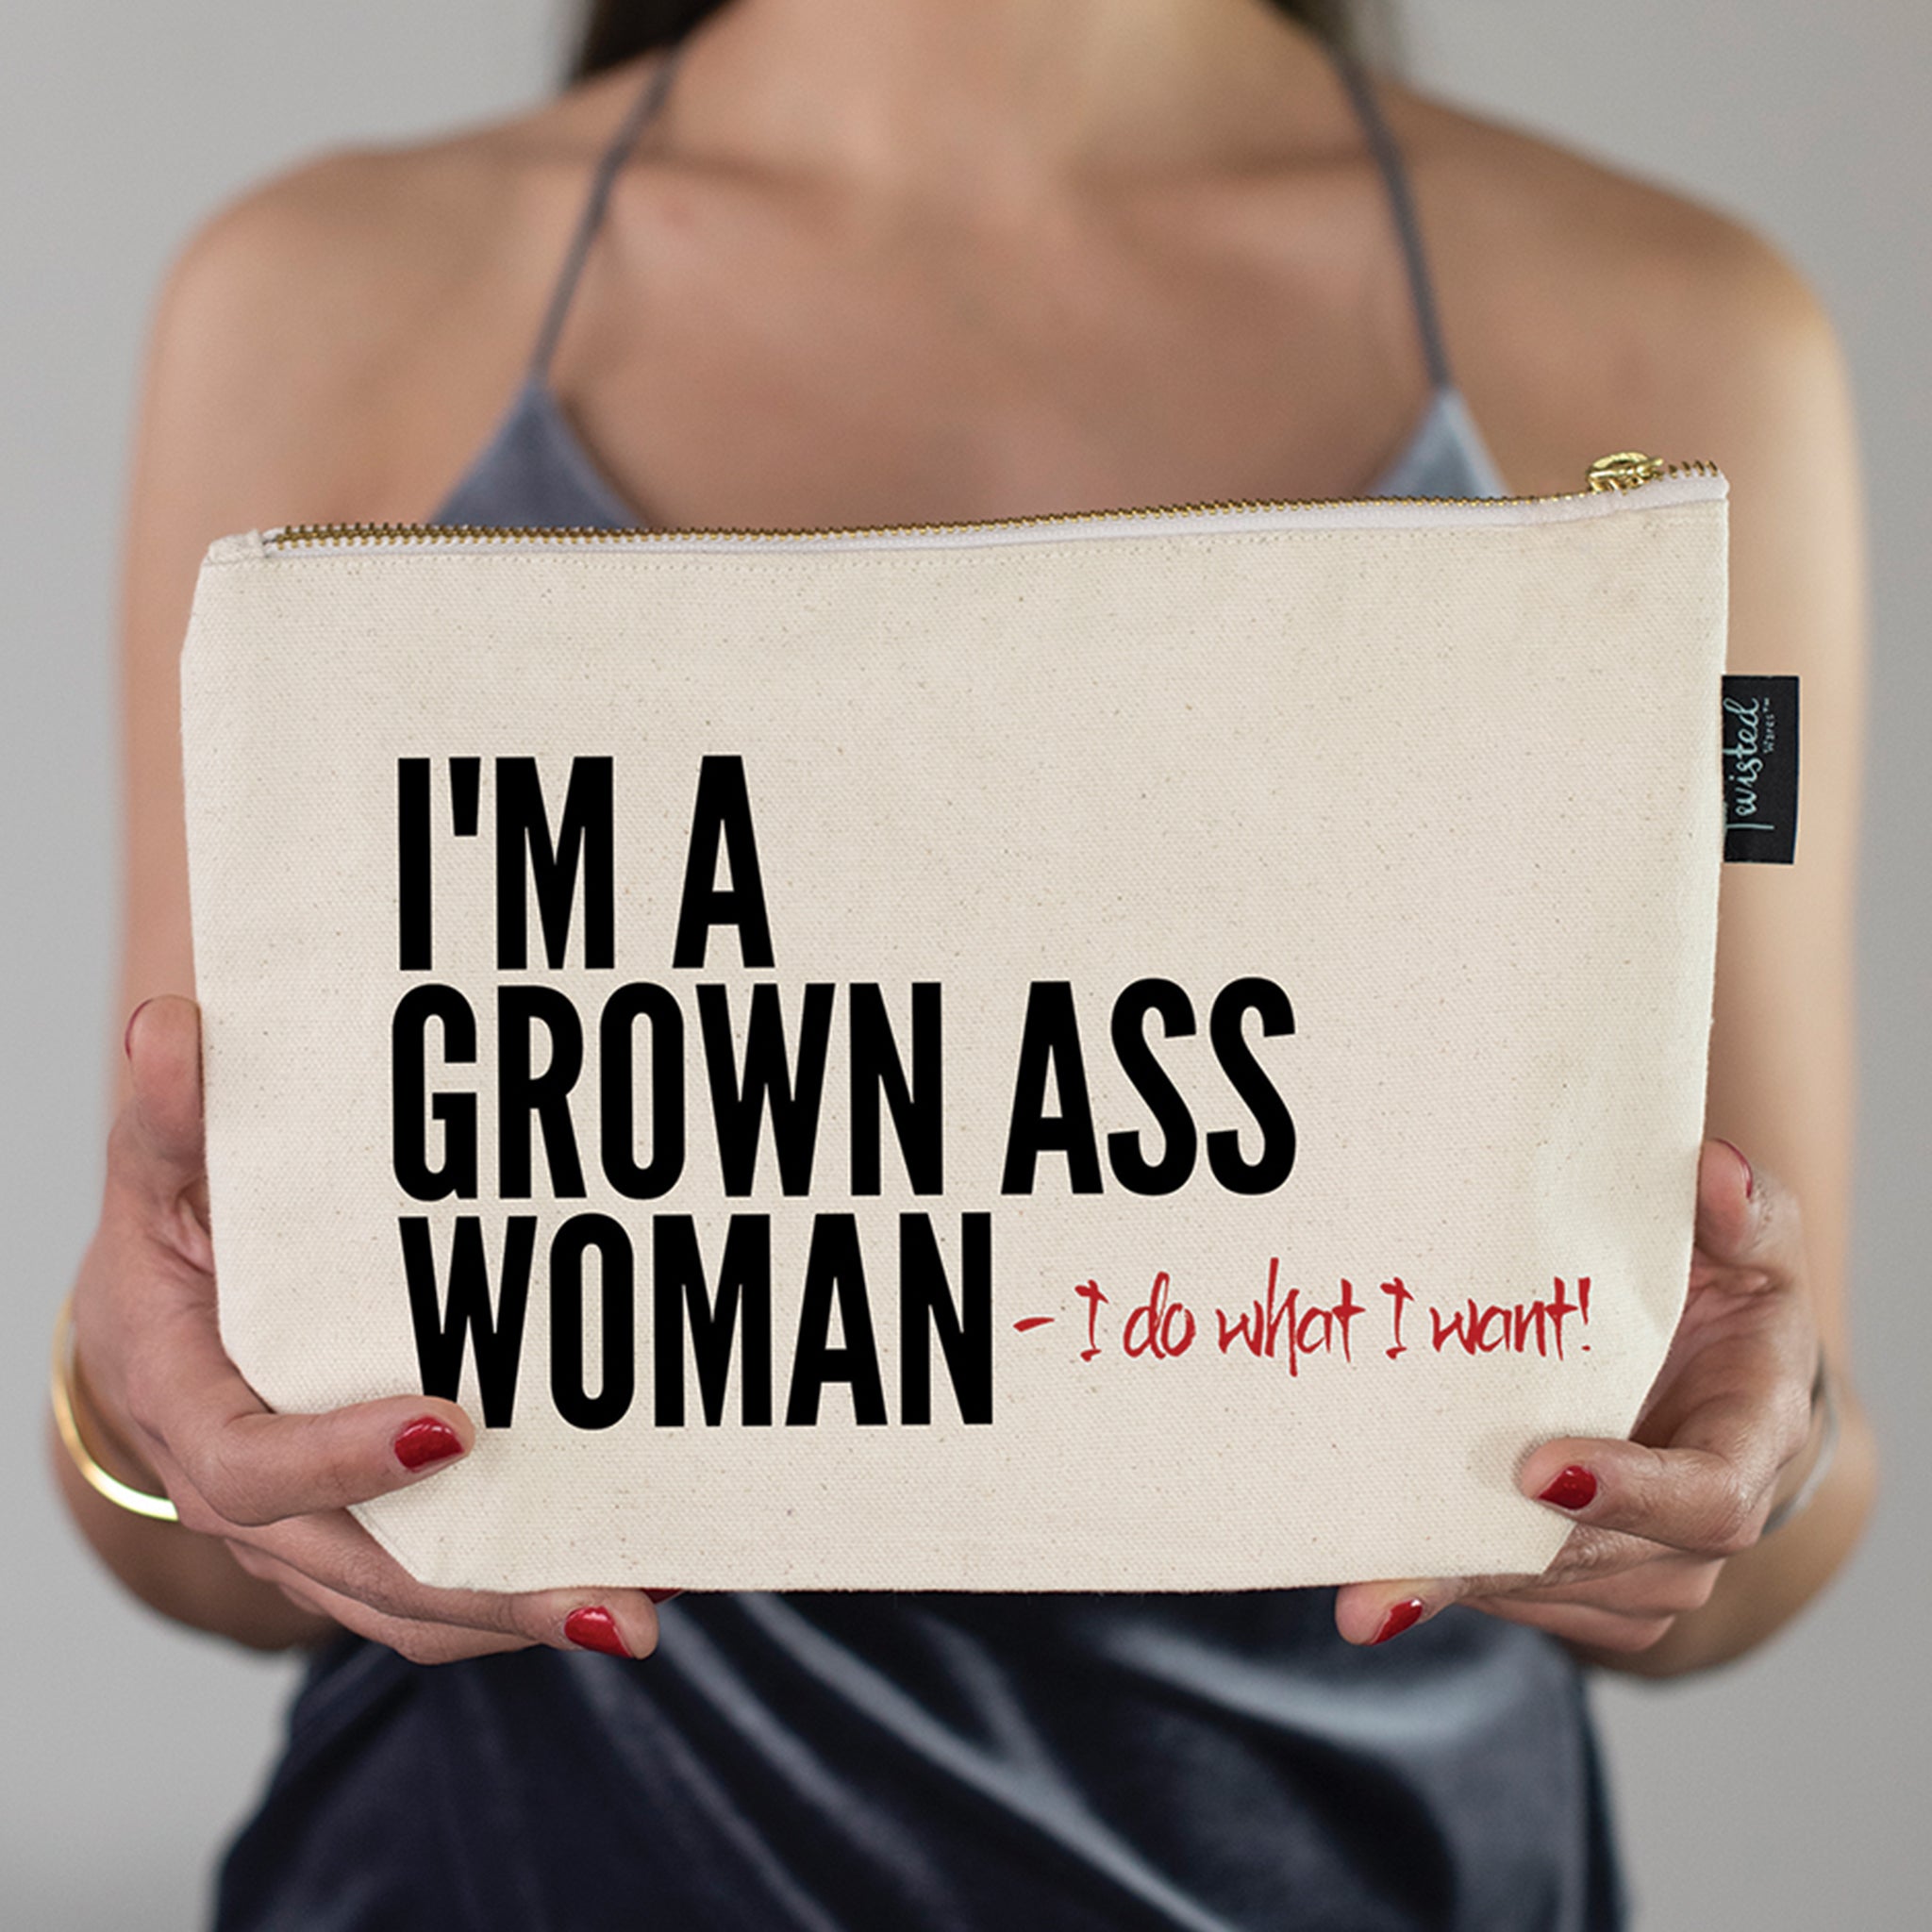 Buy Bad Ass Woman Who Takes Care Of Everyone Zipper Pouch Stationery From  MagazineCafeStore, NY, USA.